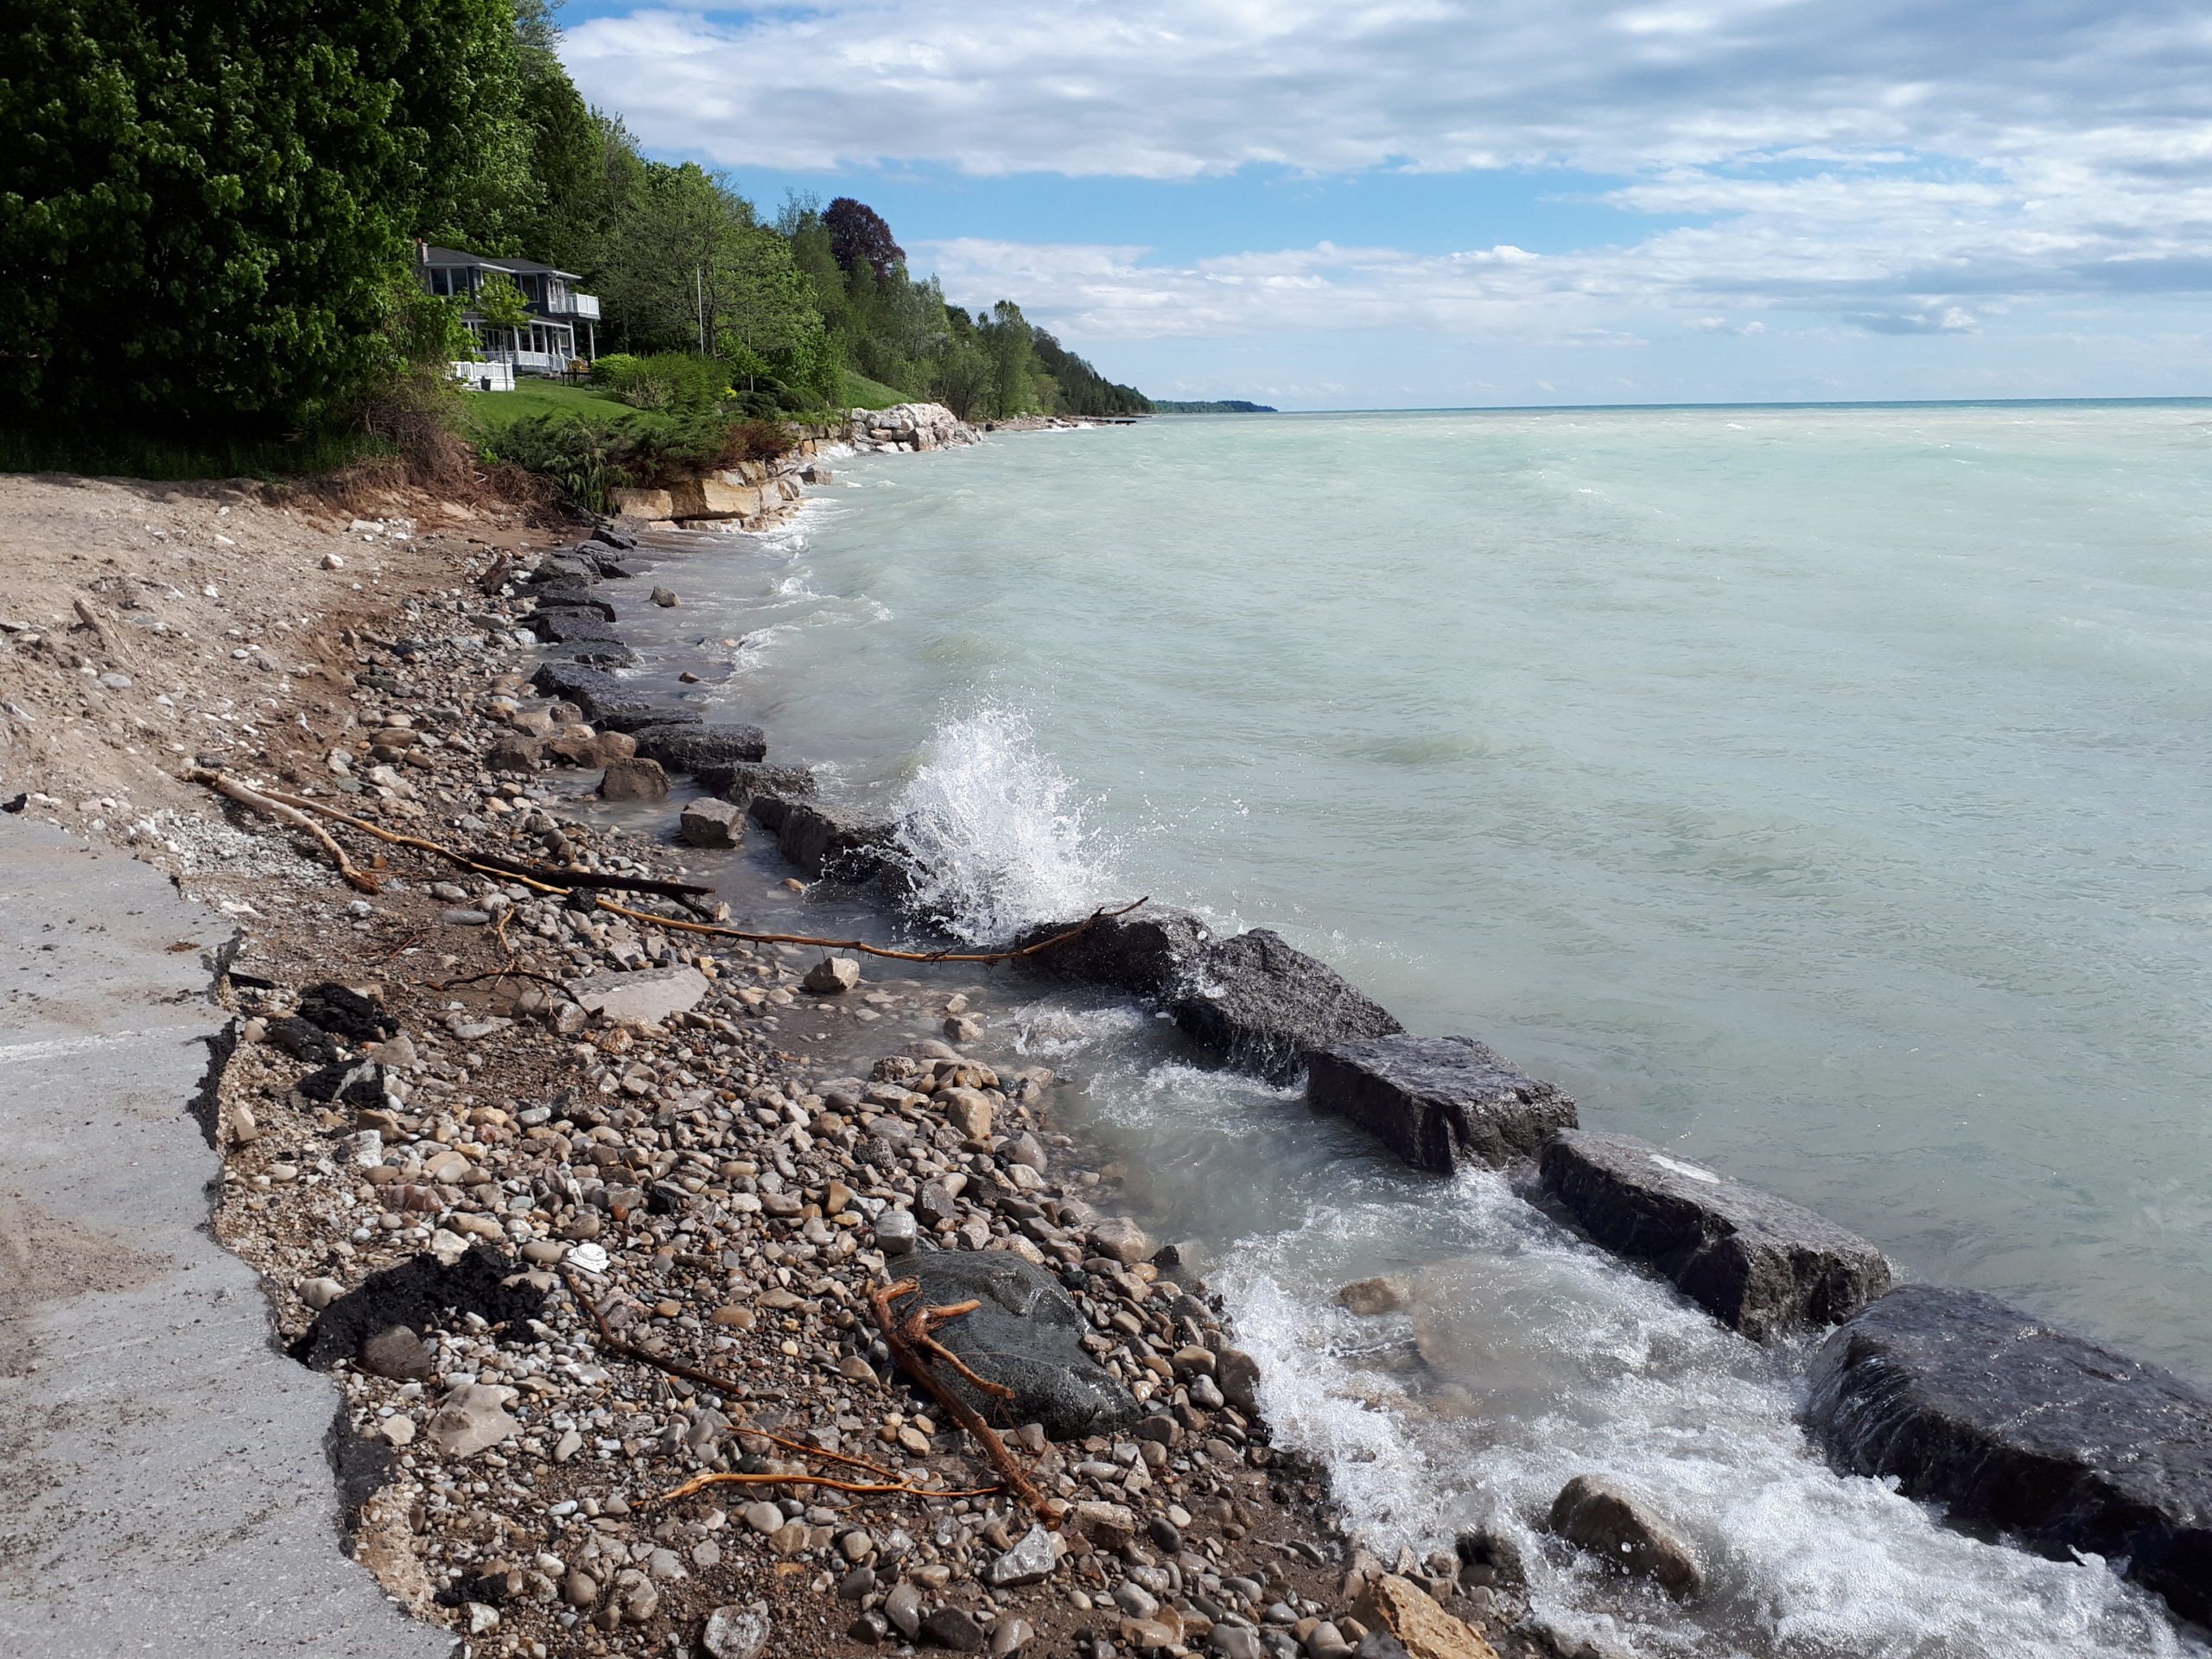 Local conservation authorities keeping an eye on erosion